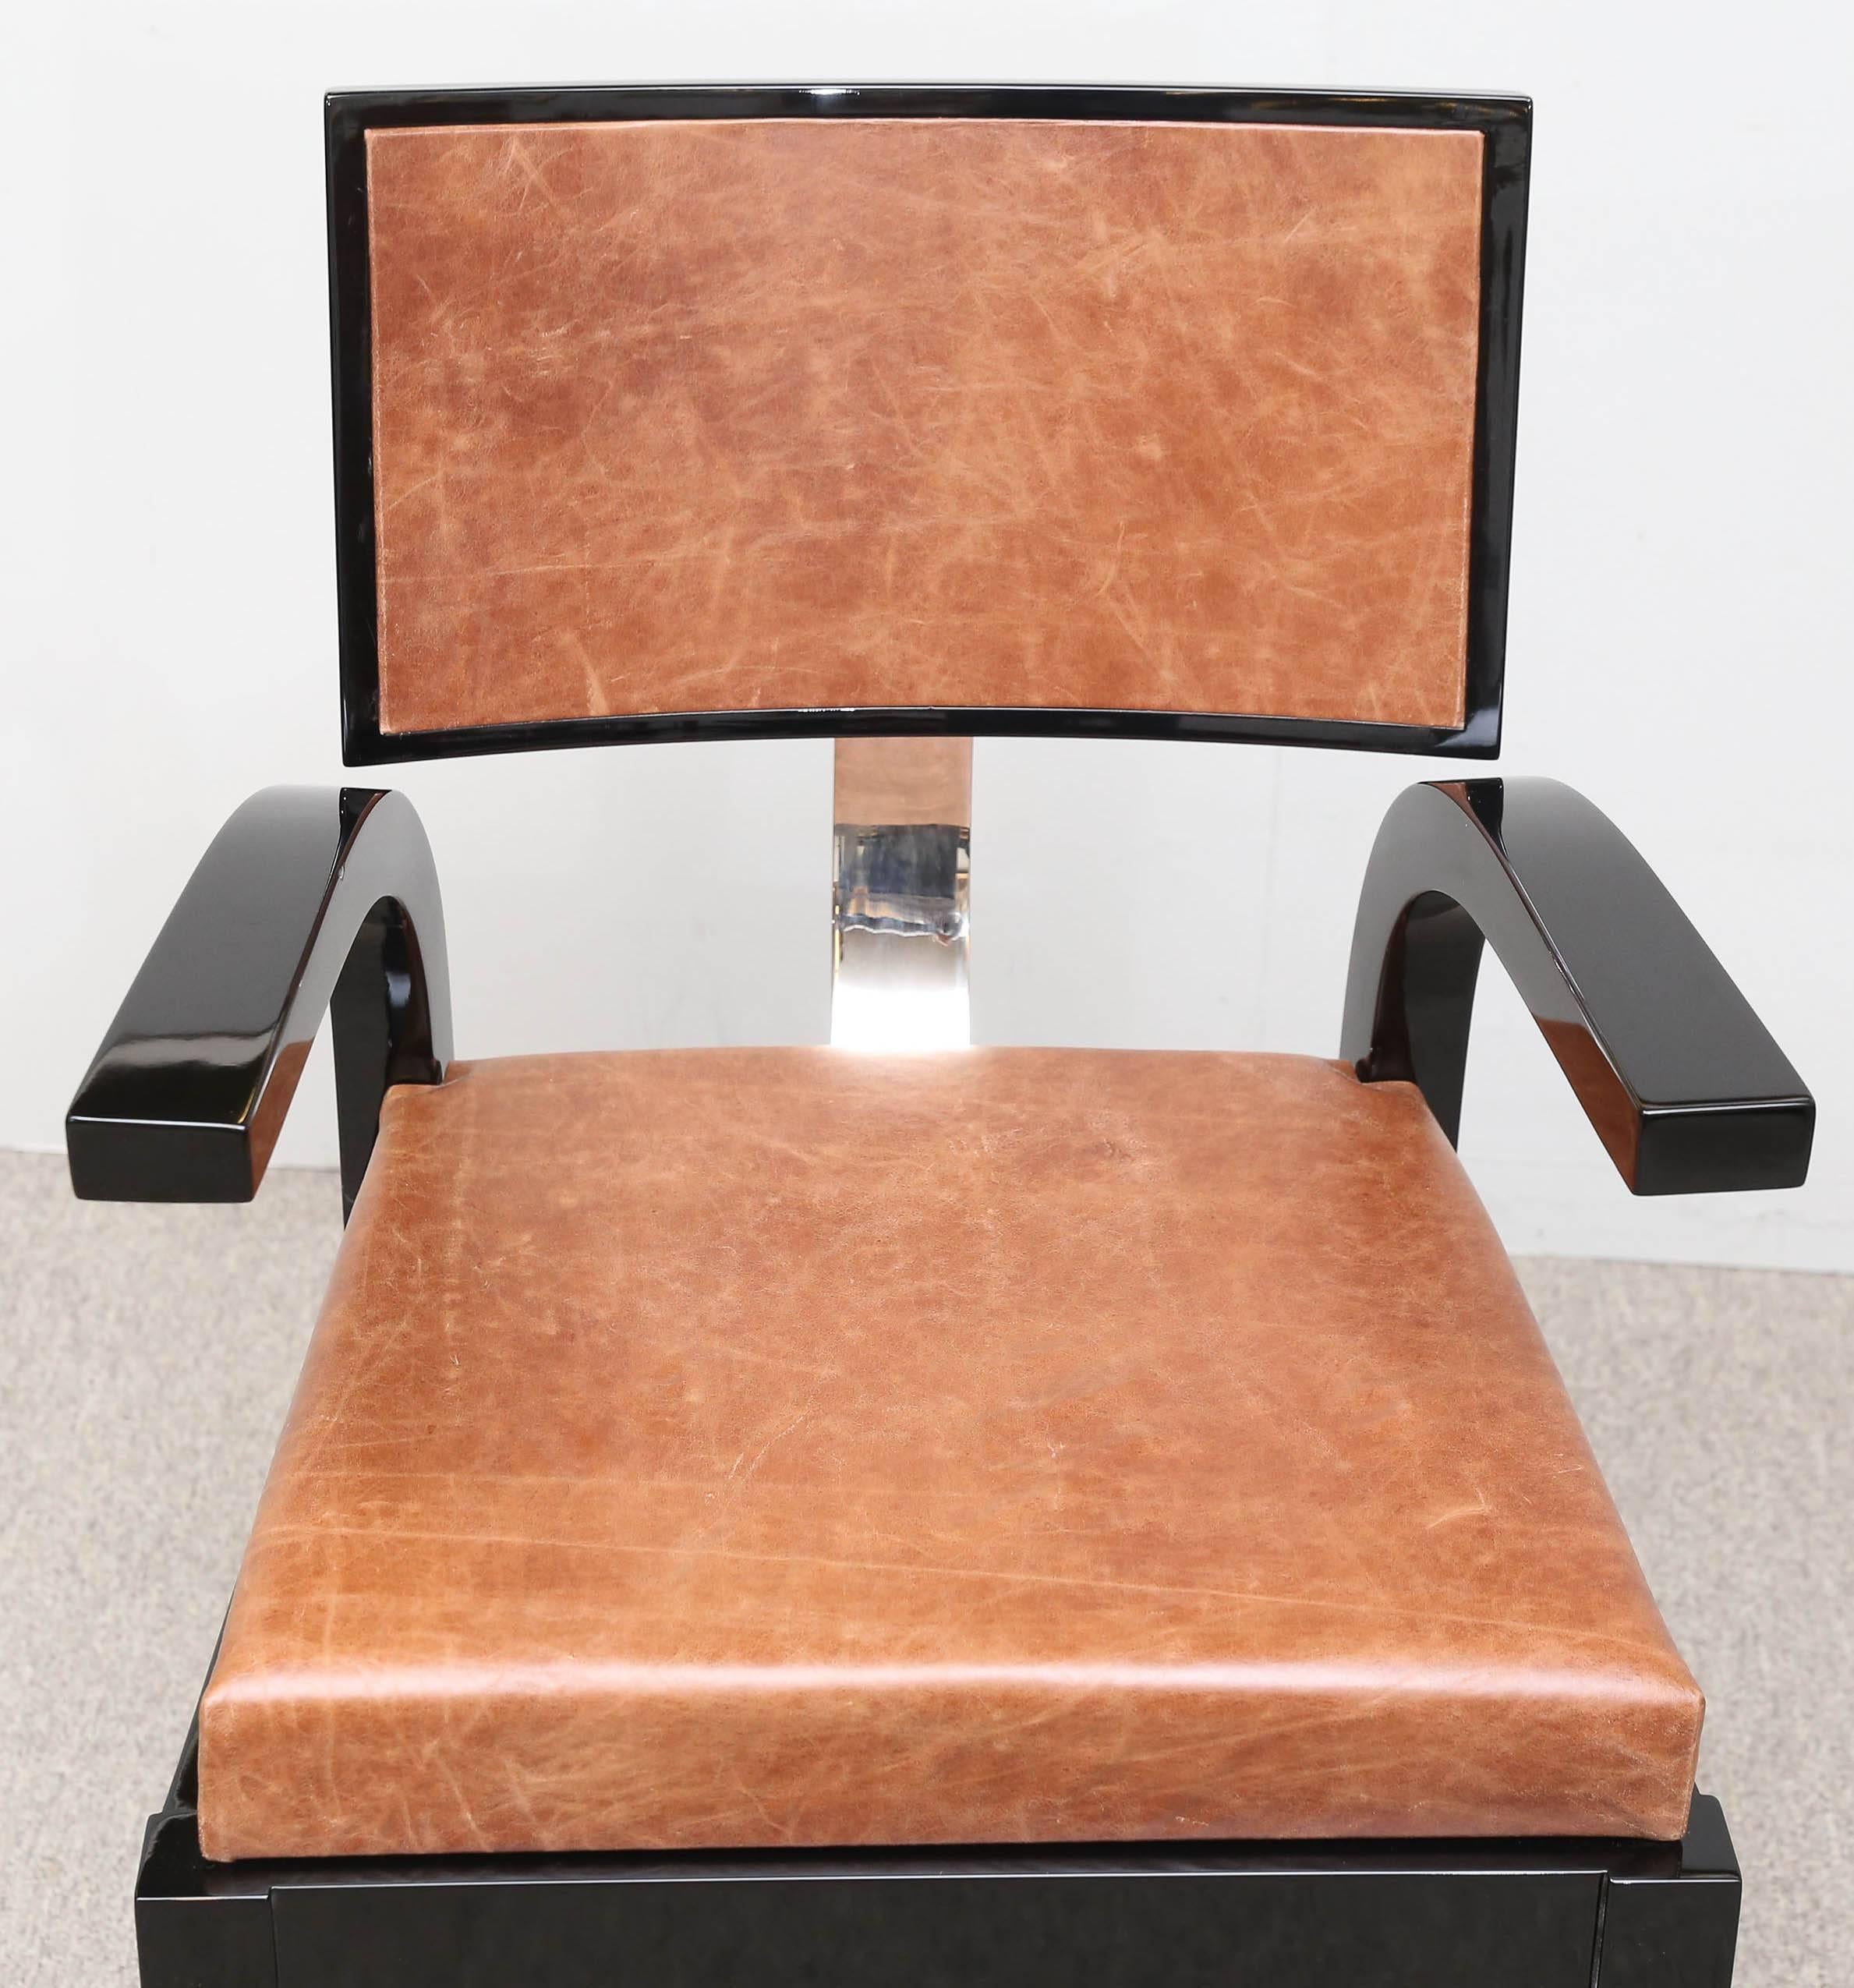 The frame is made out of ebonized wood. A sit and back are covered with cowhide. The back of the chair is attached to the sit with a chrome rectangular connector. 
In the fall of 1931, Lajos Kozma (1884-1848) presented the forerunner of the chair